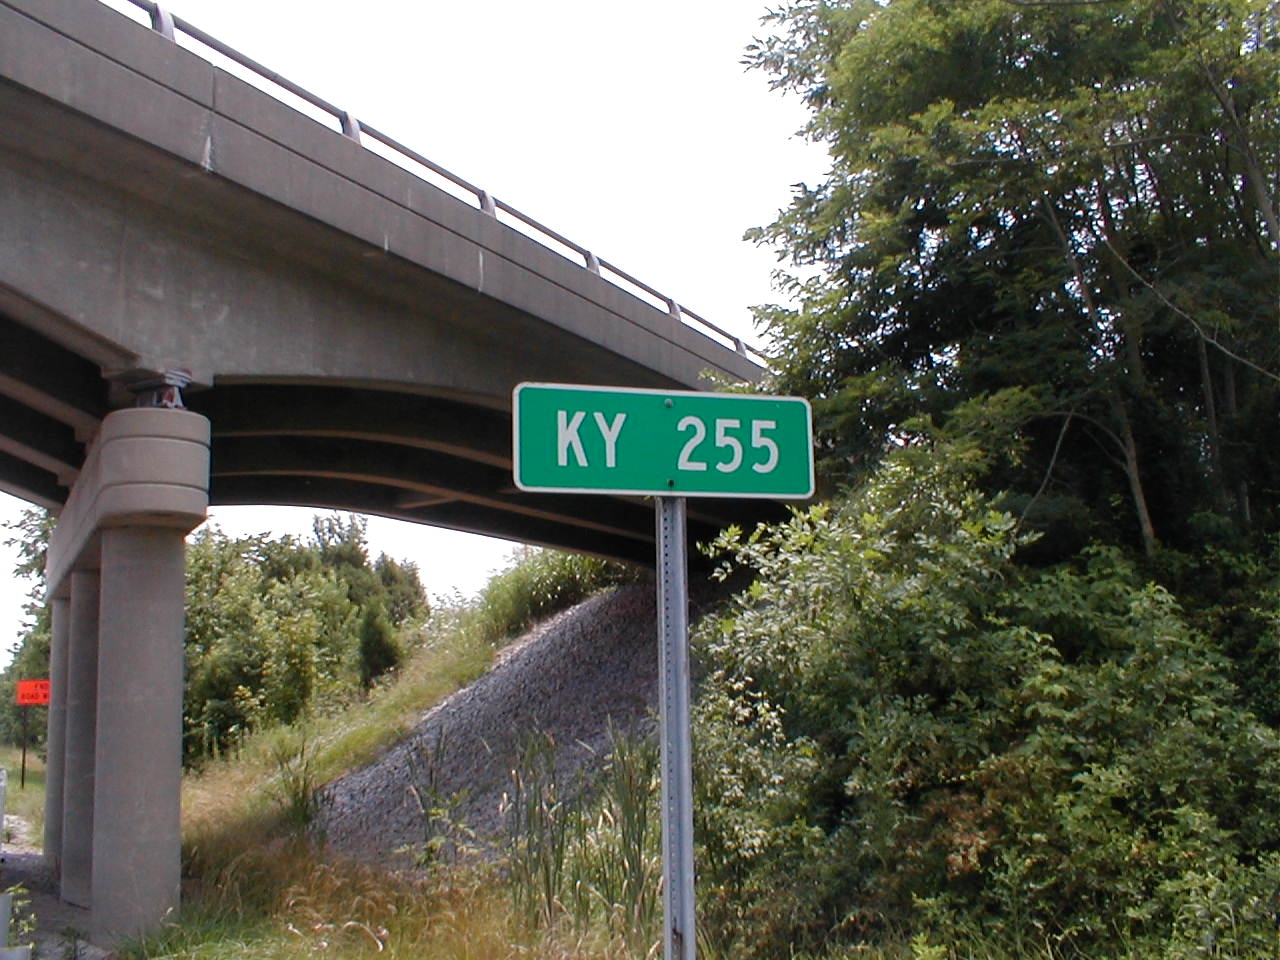 KY 255 sign marking KY 255's overpass over the parkway.